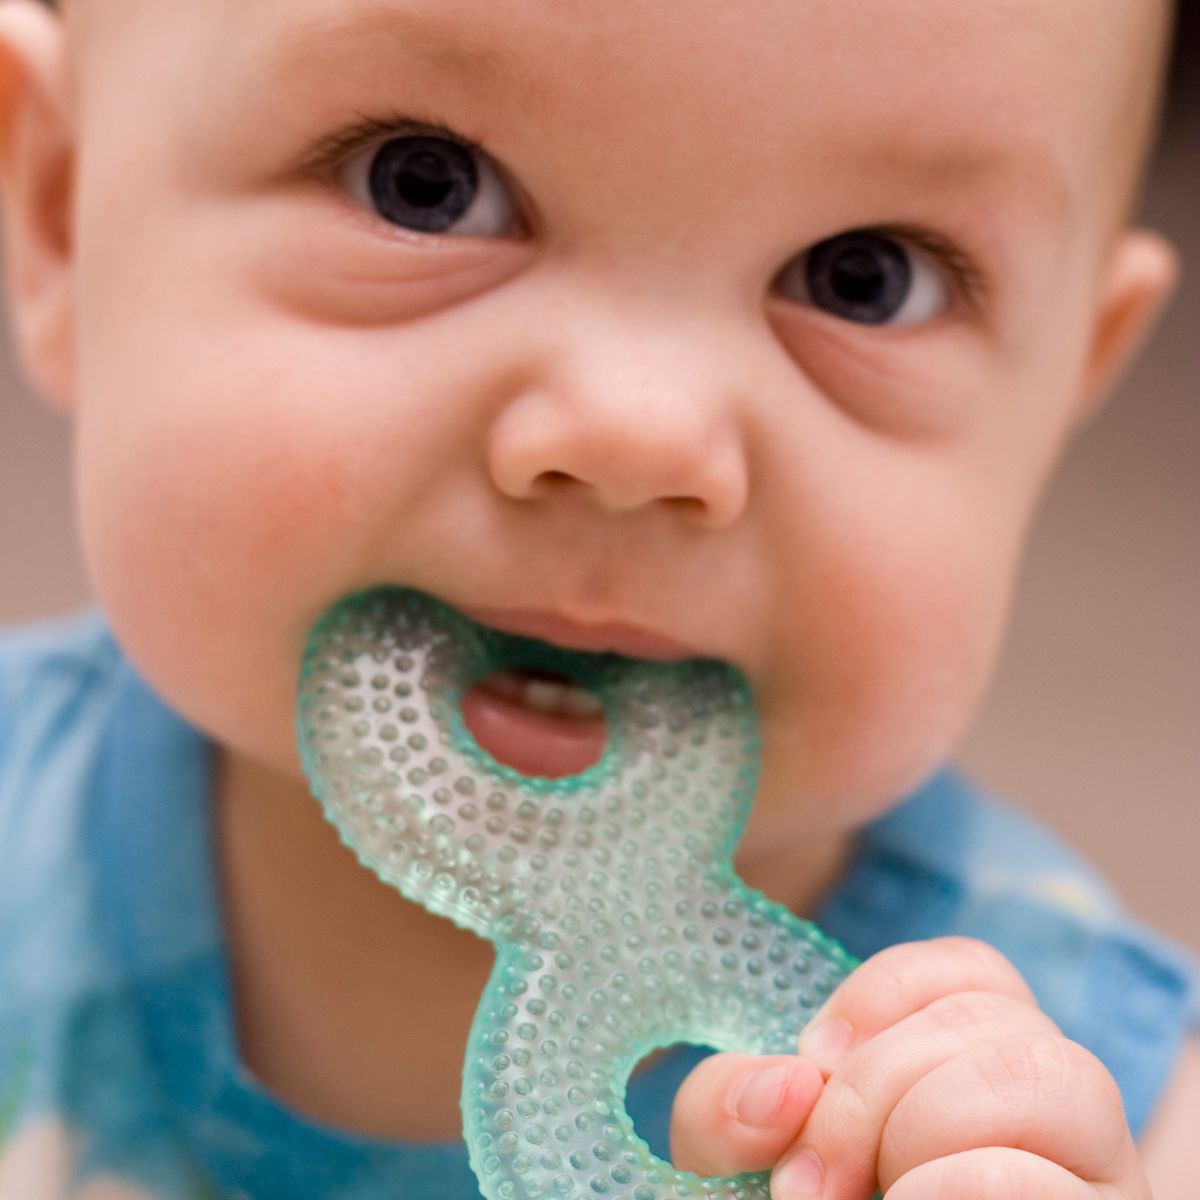 Is Your Baby Teething or Going Through A Sleep Regression?